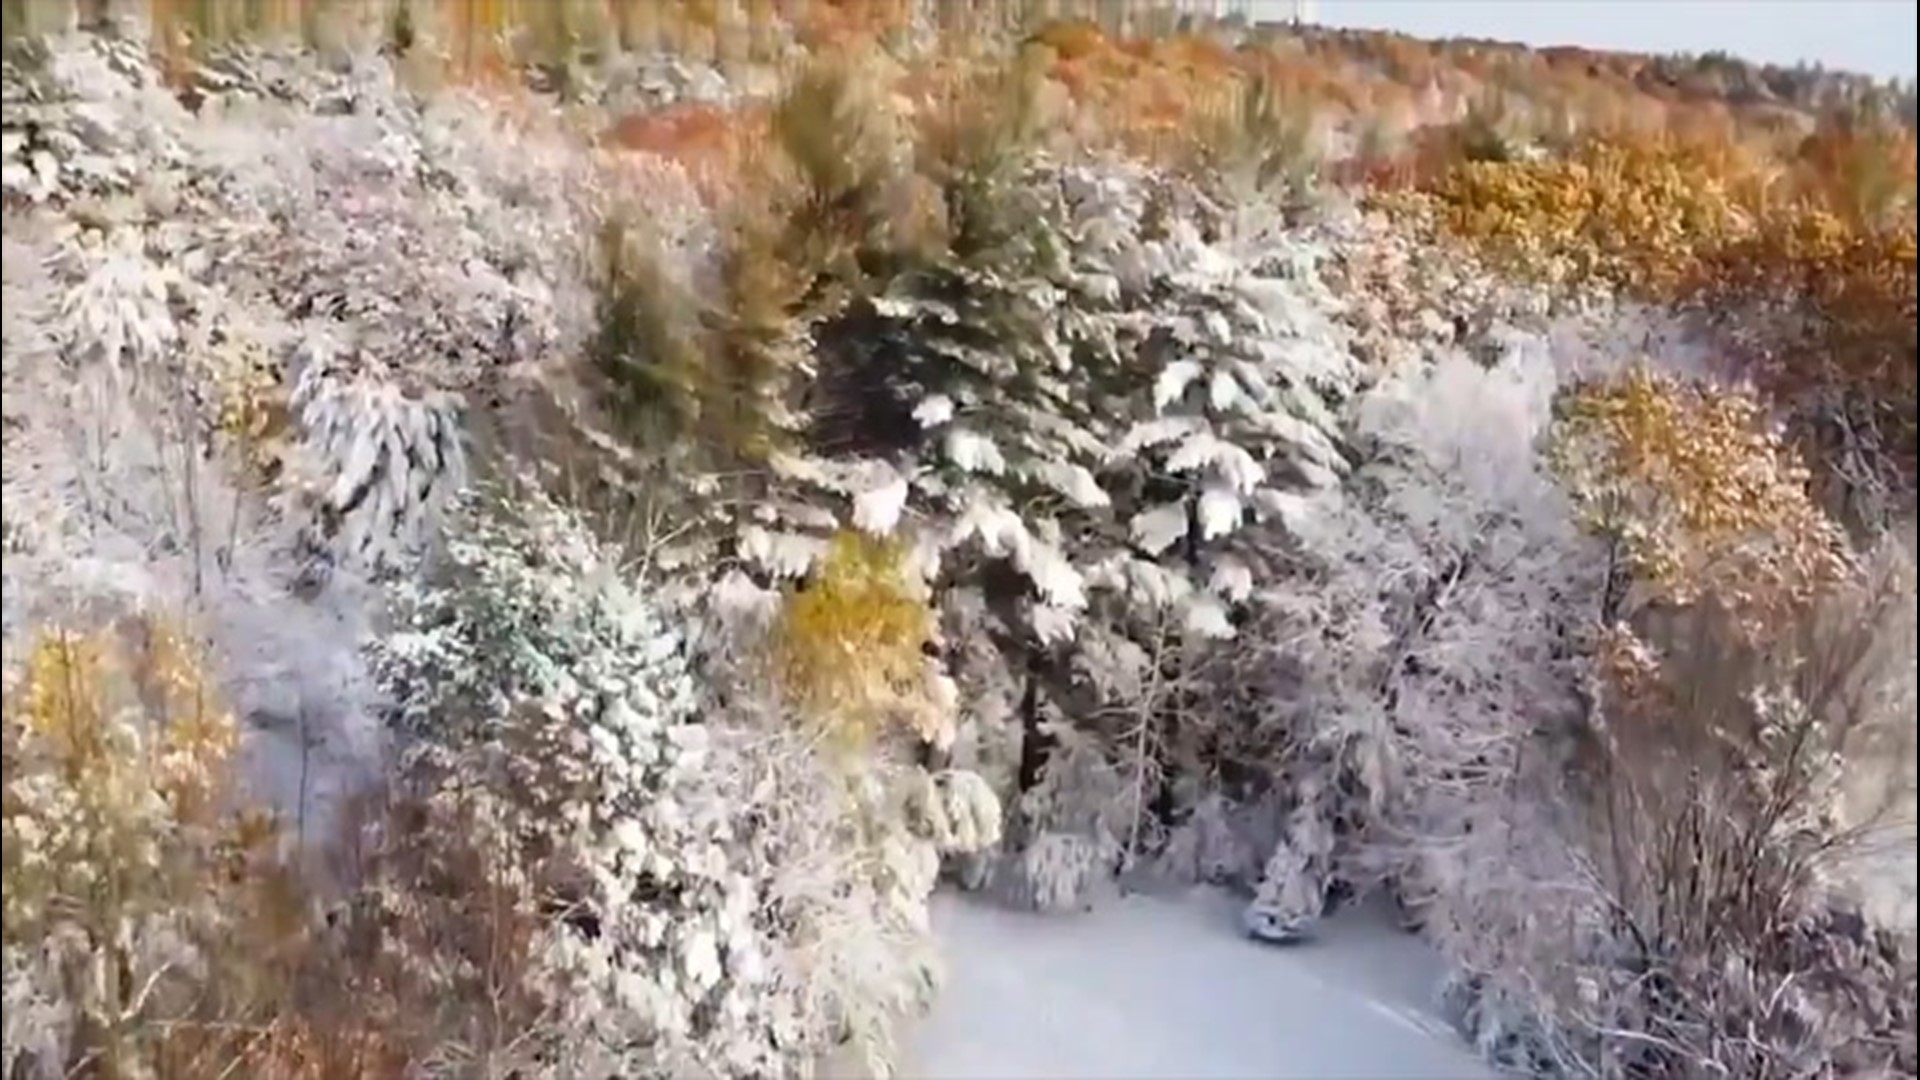 Snow topped the trees in Fitchburg, Massachusetts, one cold Friday afternoon on Oct. 30.